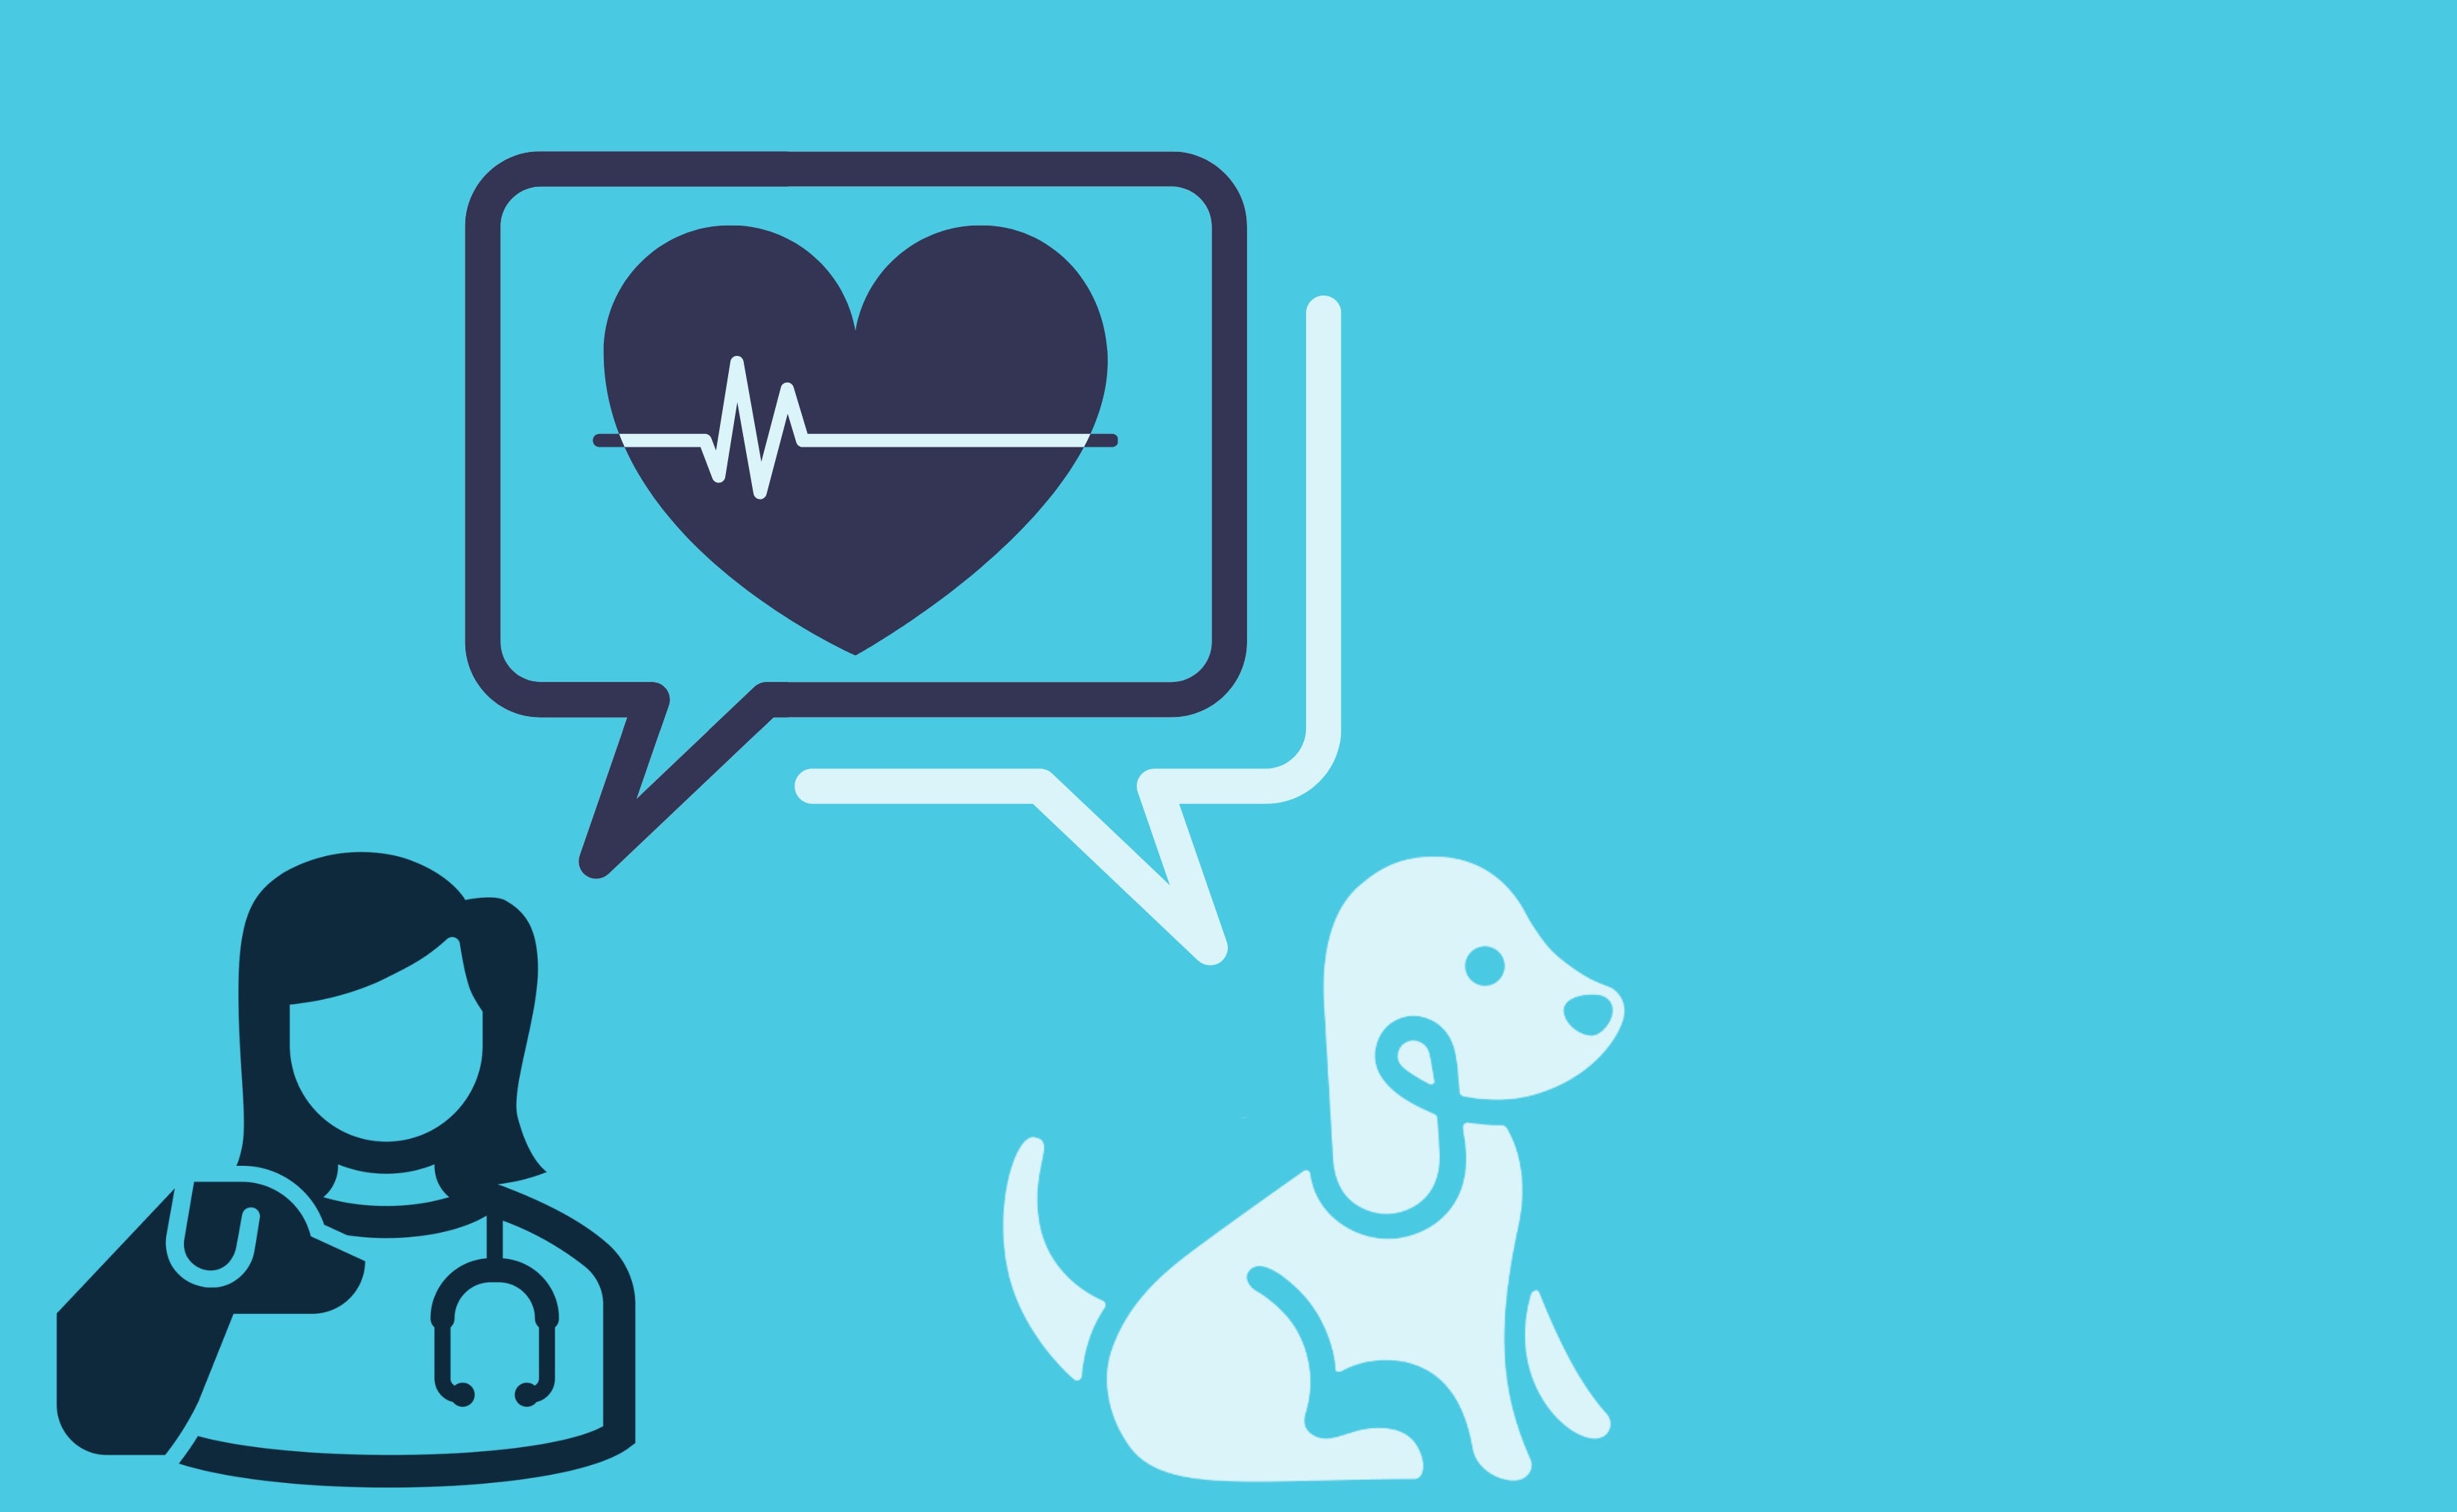 Our products are designed to increase communication between pet parents and veterinary caregivers, thereby enhancing customer loyalty.